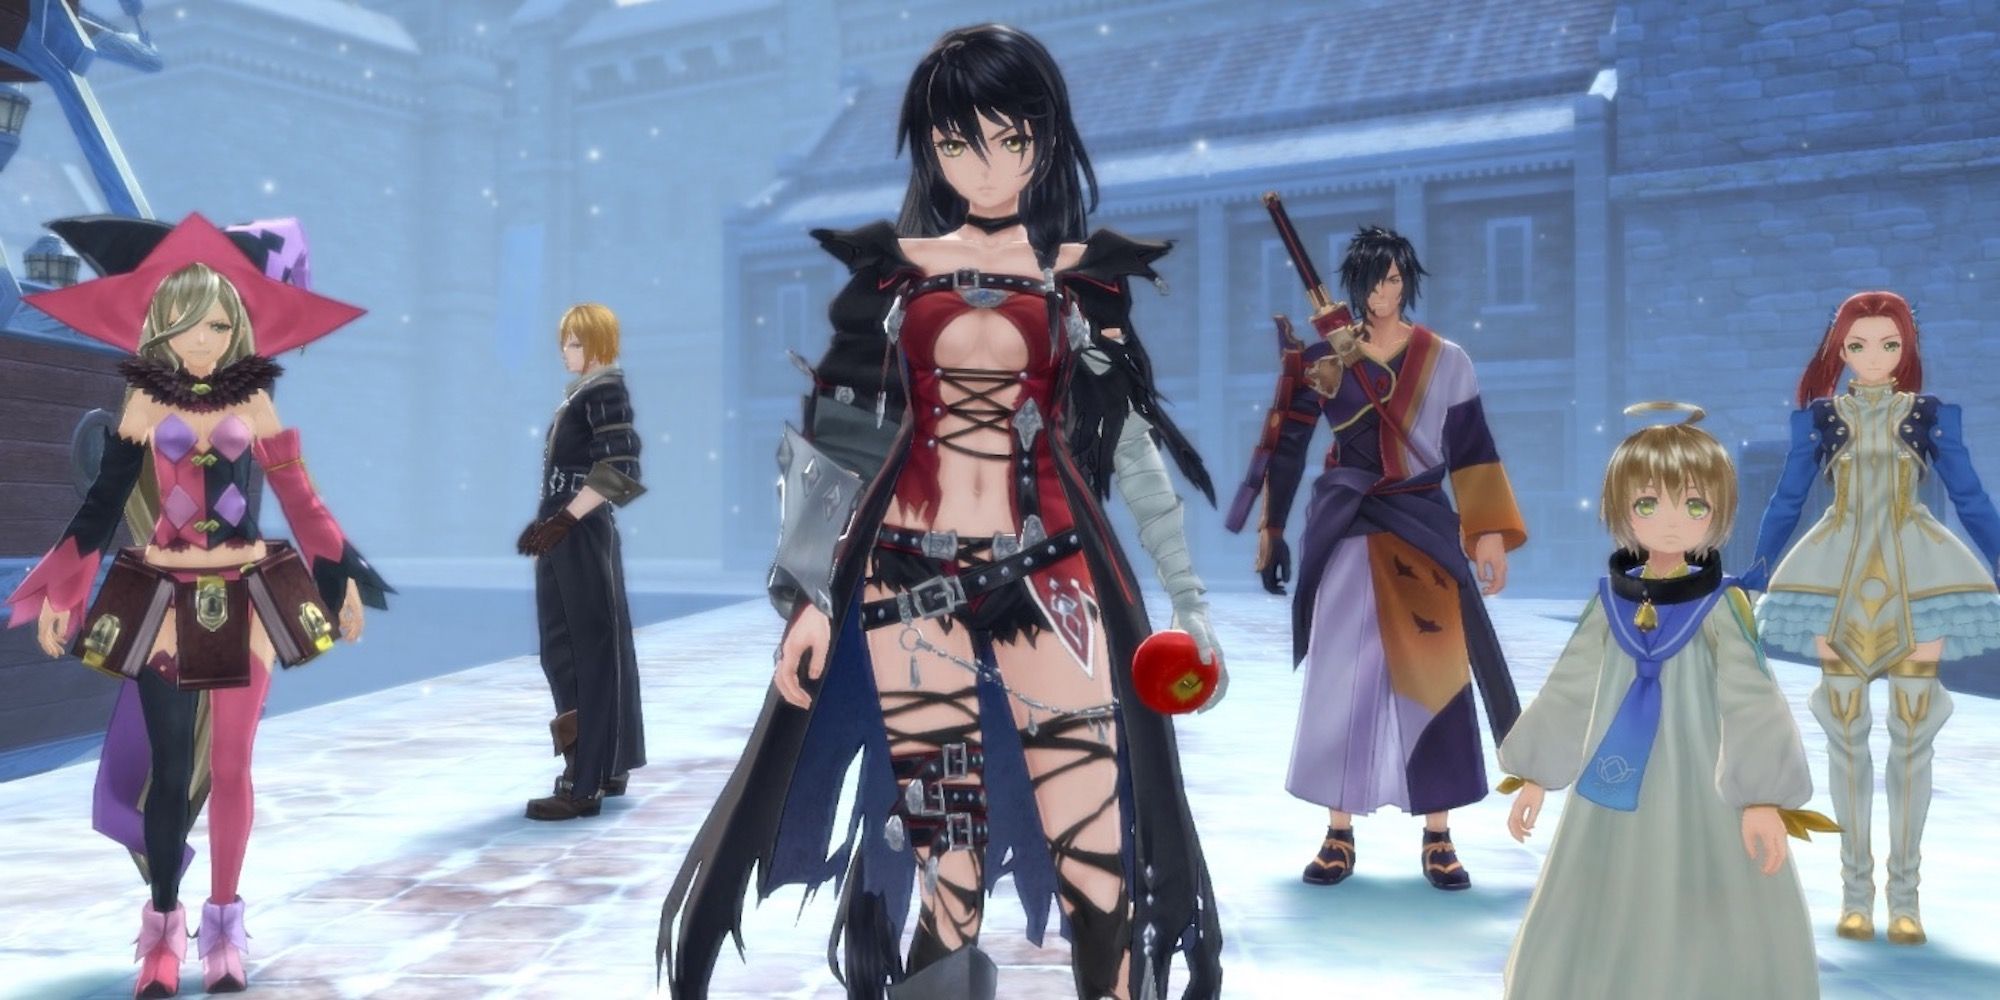 A cutscene featuring characters in Tales Of Berseria